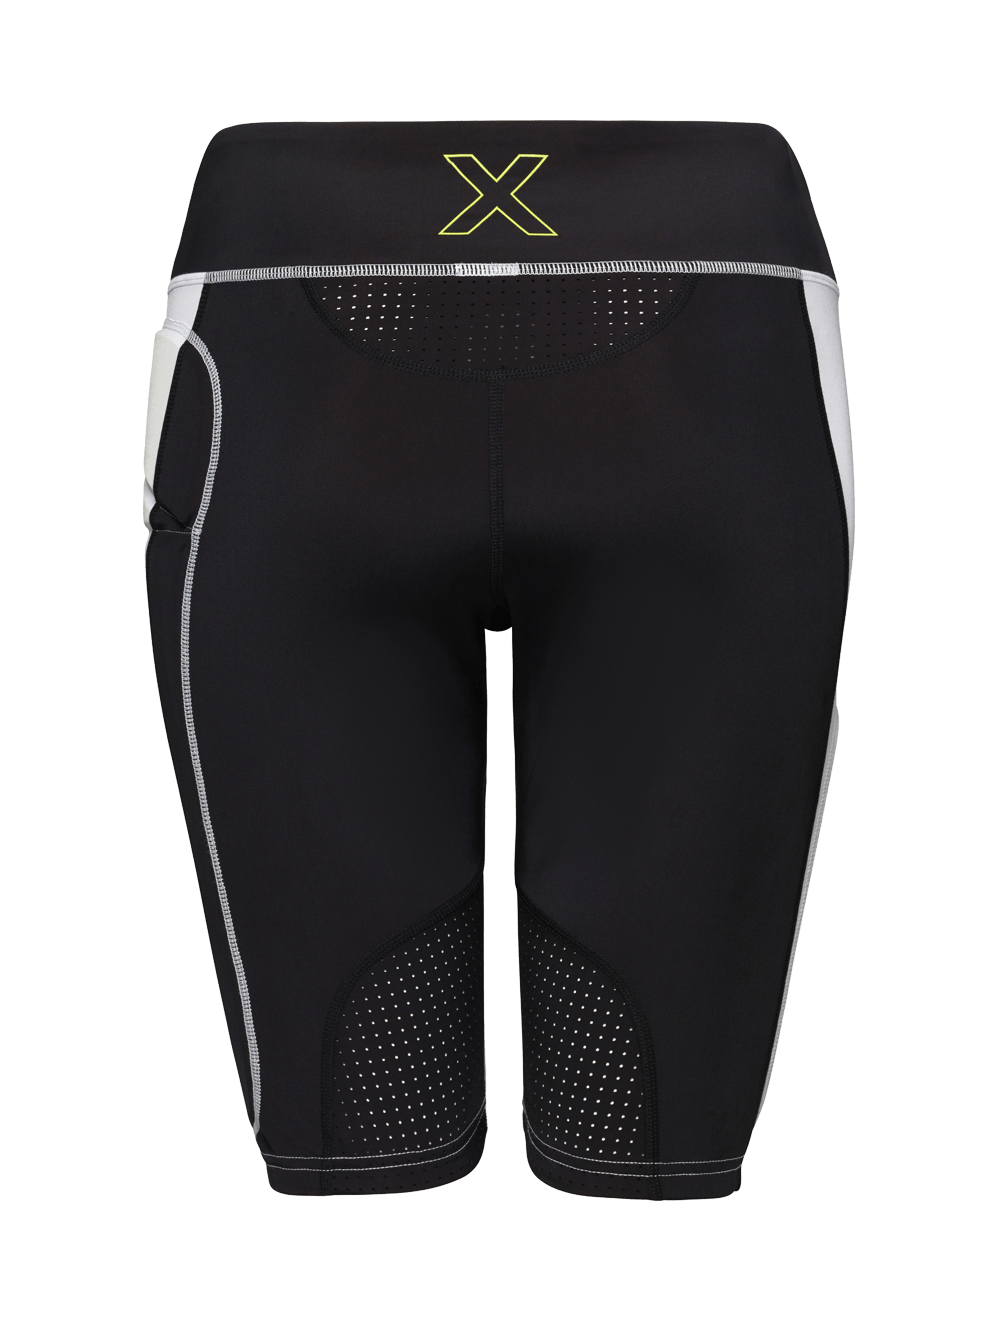 Girls Youth Cricket Impact Protection Shorts - AlbionX